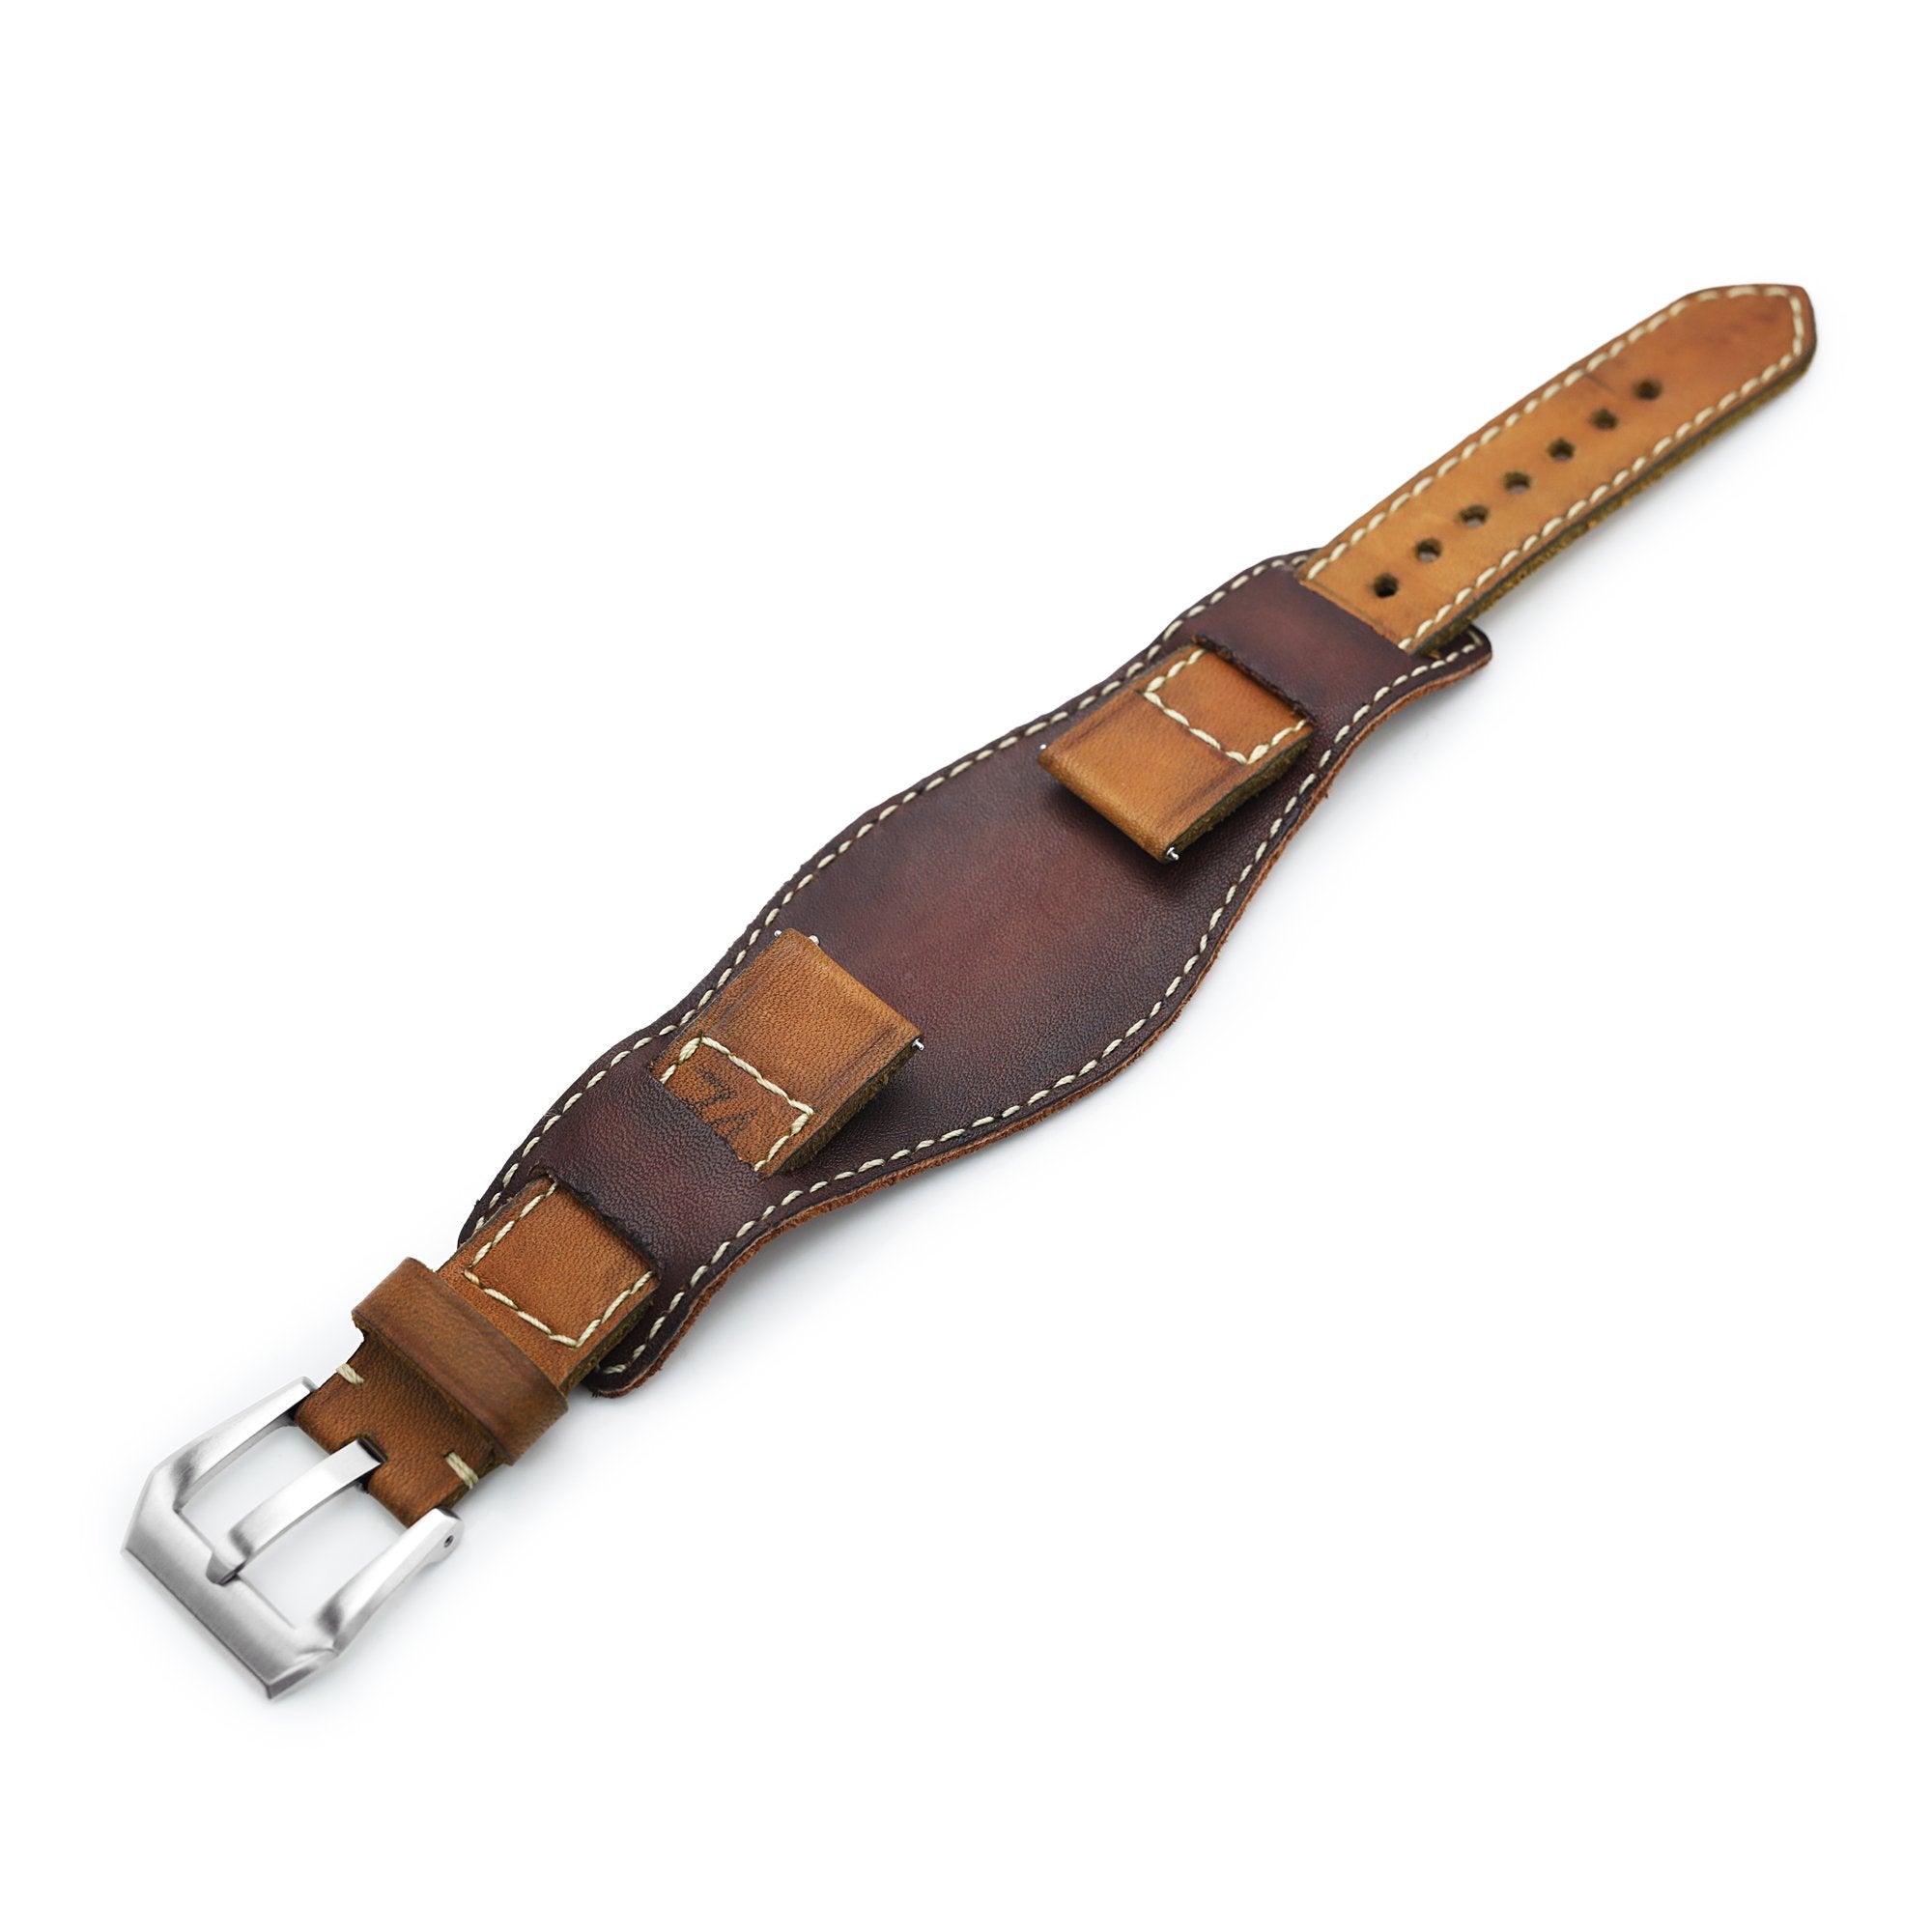 20mm Gunny X MT '74' Light Brown Handmade Quick Release Reversible Bund Leather Strap Strapcode Watch Bands